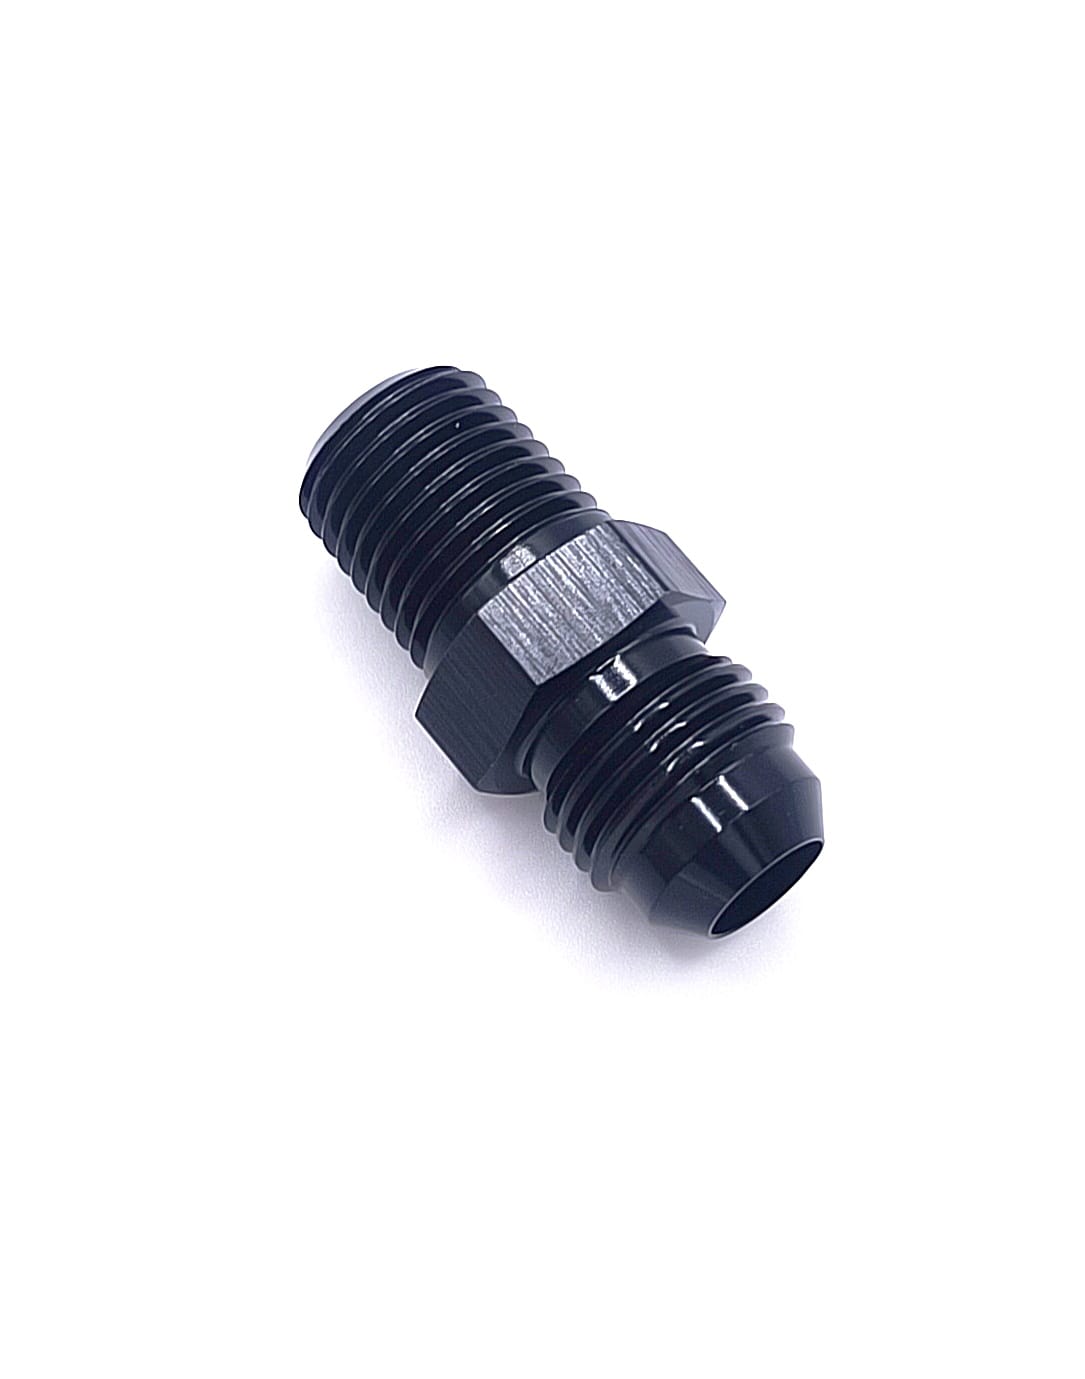 Straight 1/4 NPT To Male AN6 (BLACK)